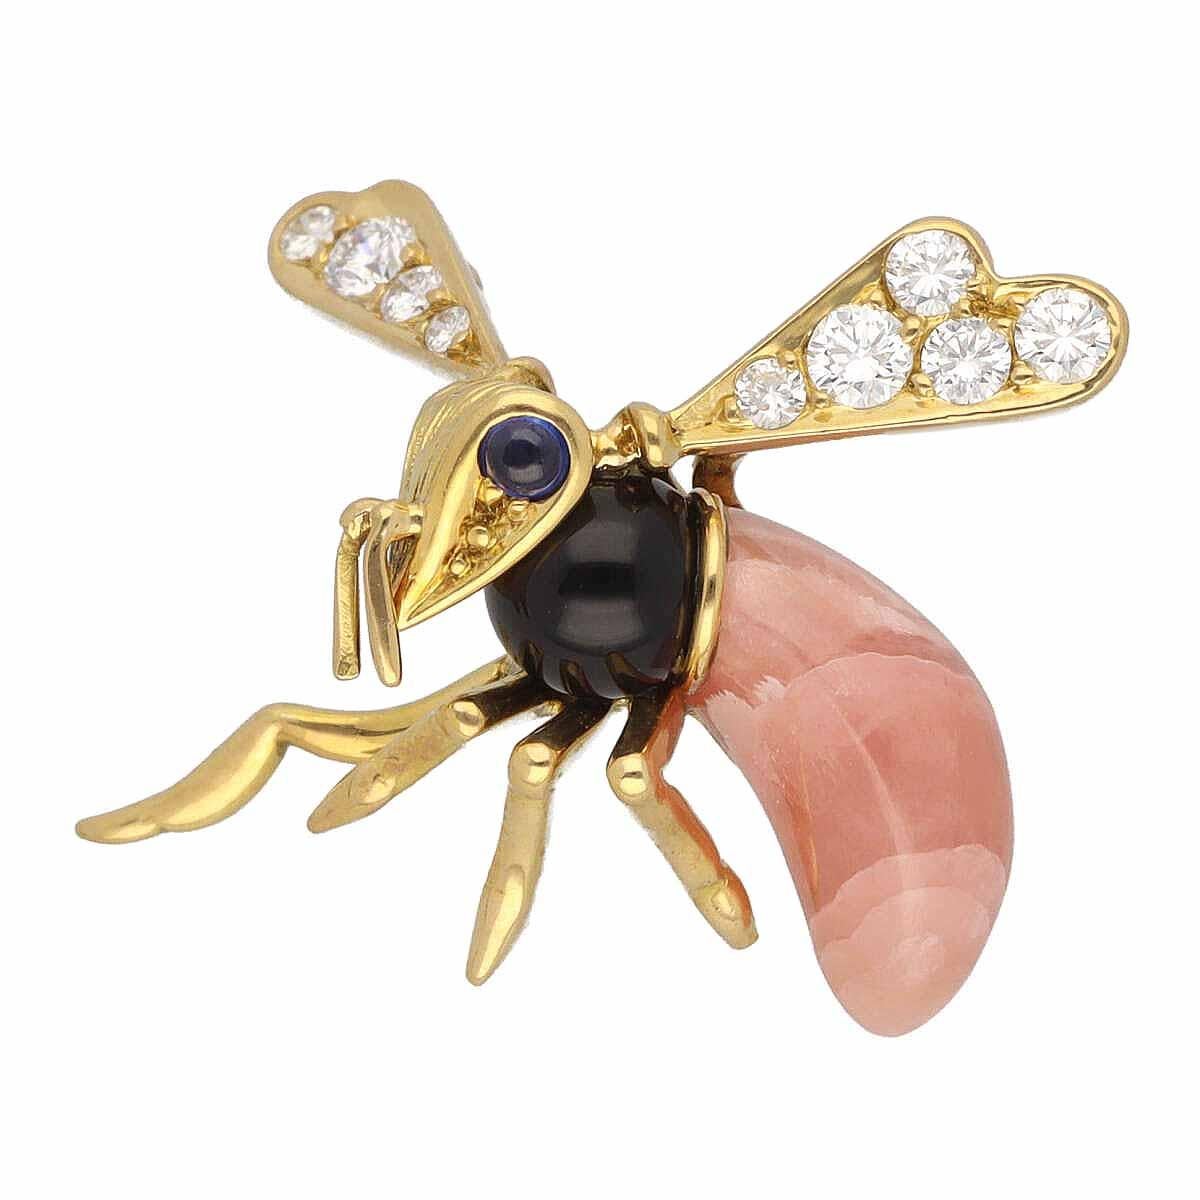 Brand:PIAGET
Name:Flying bee brooch
Material:9P diamond, 1P sapphire, 1P onyx, pink agate, 750 K18 YG yellow gold
Weight:4.5g(Approx)
Size:W24.08mm×H15.98mm / 0.94/0.62